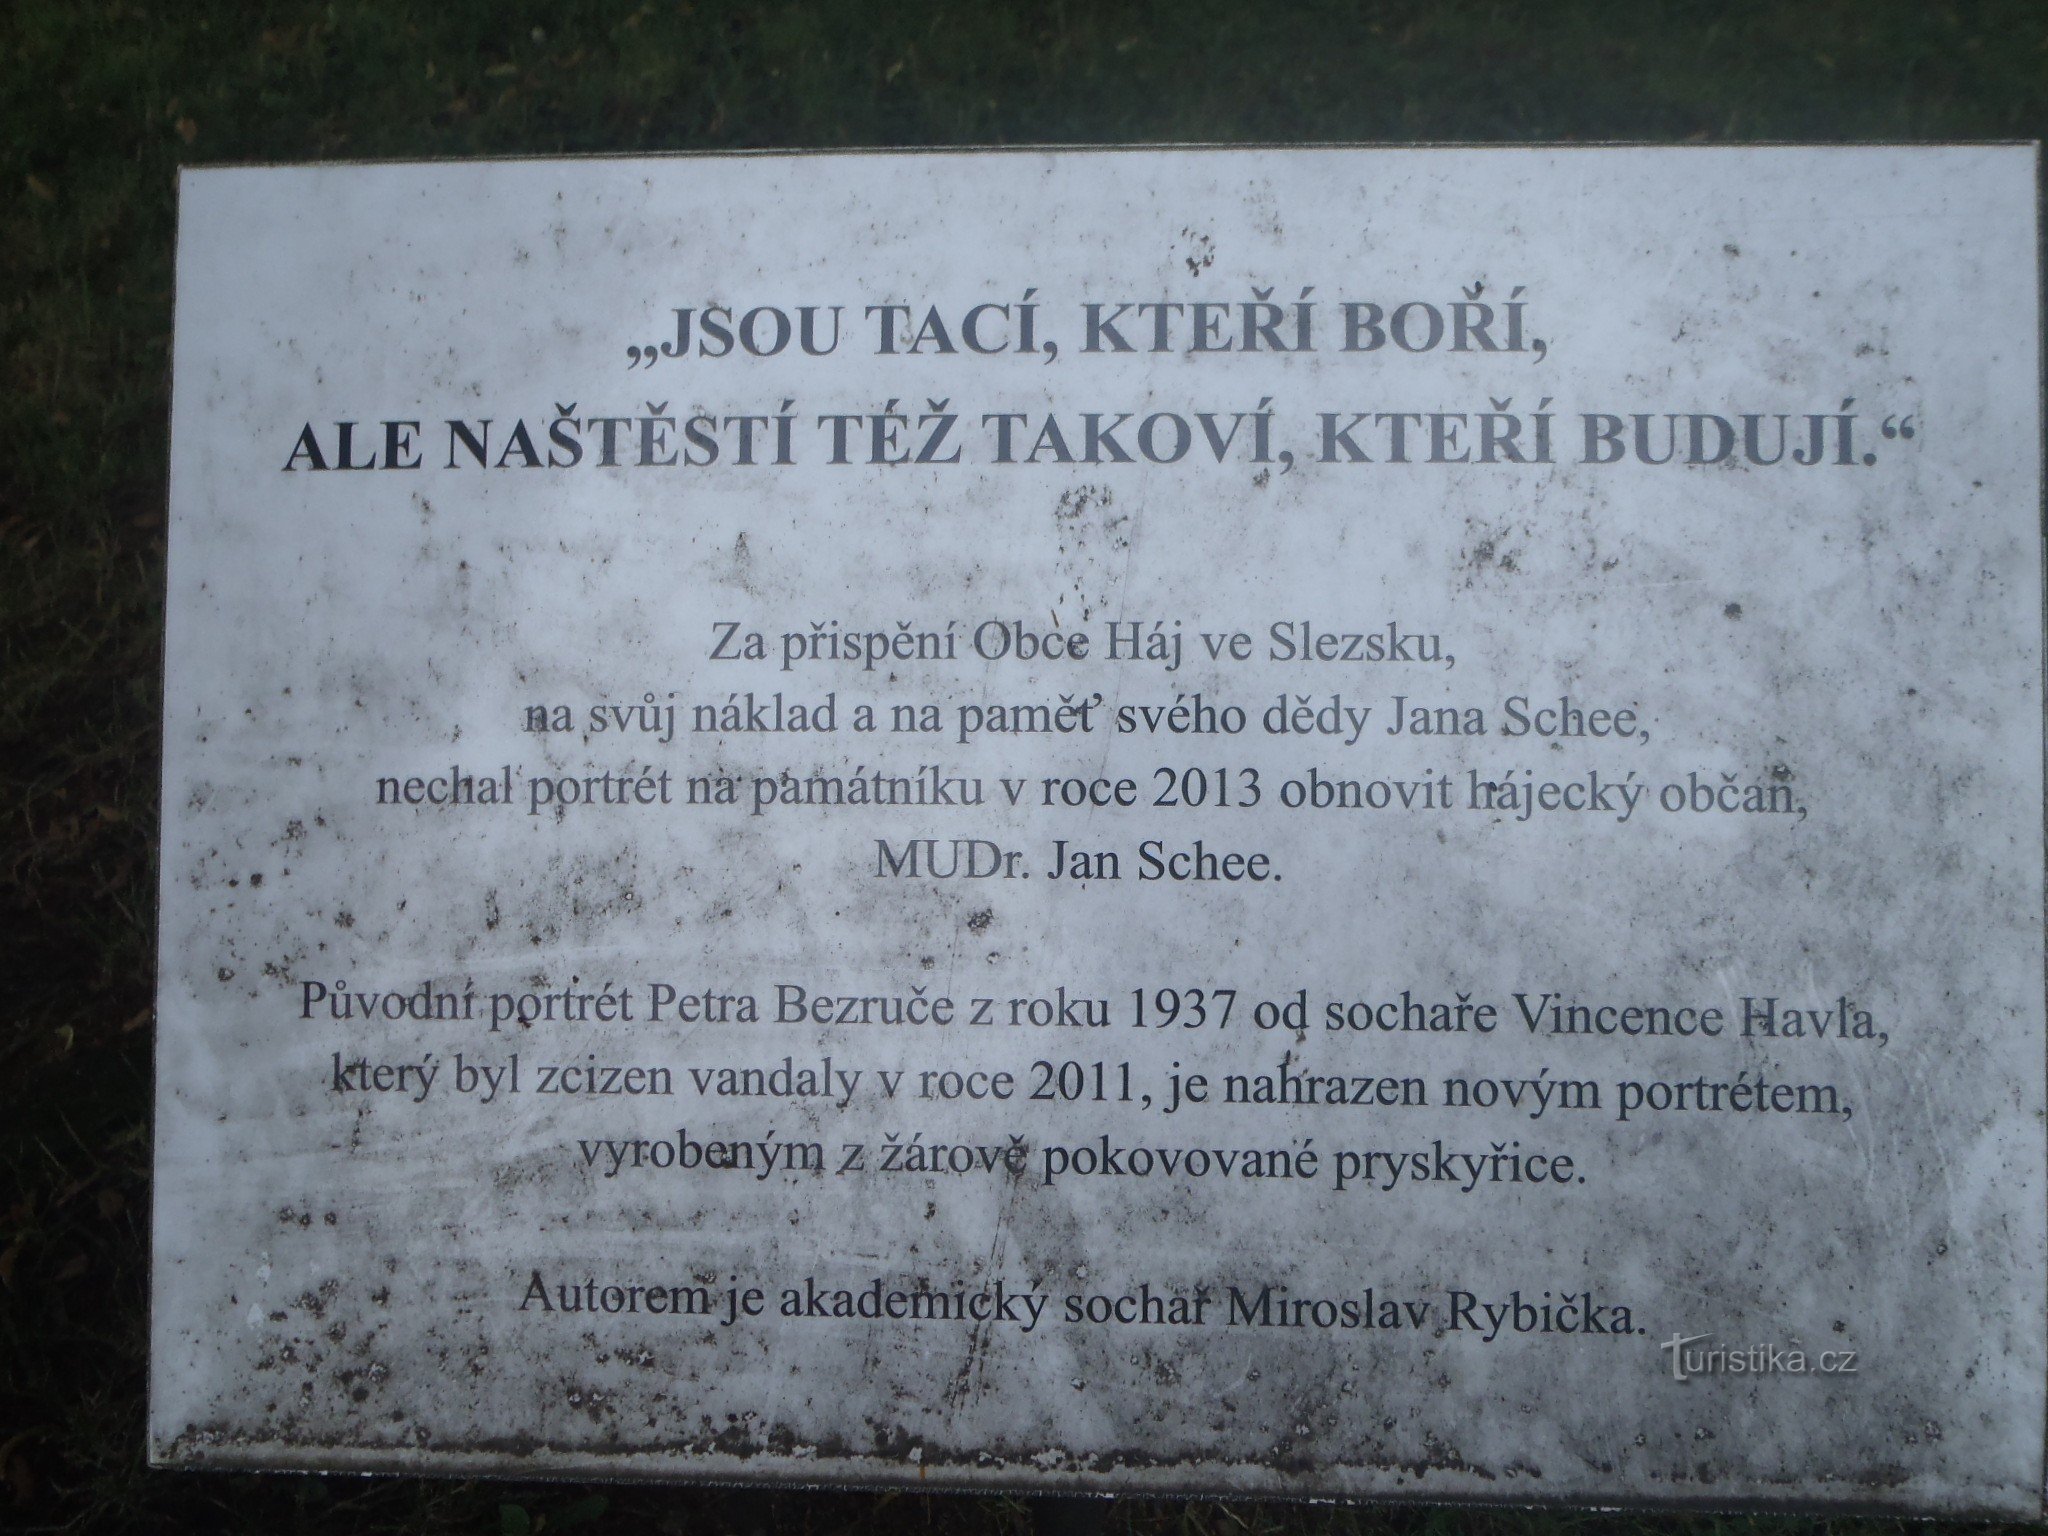 The inscription at the monument